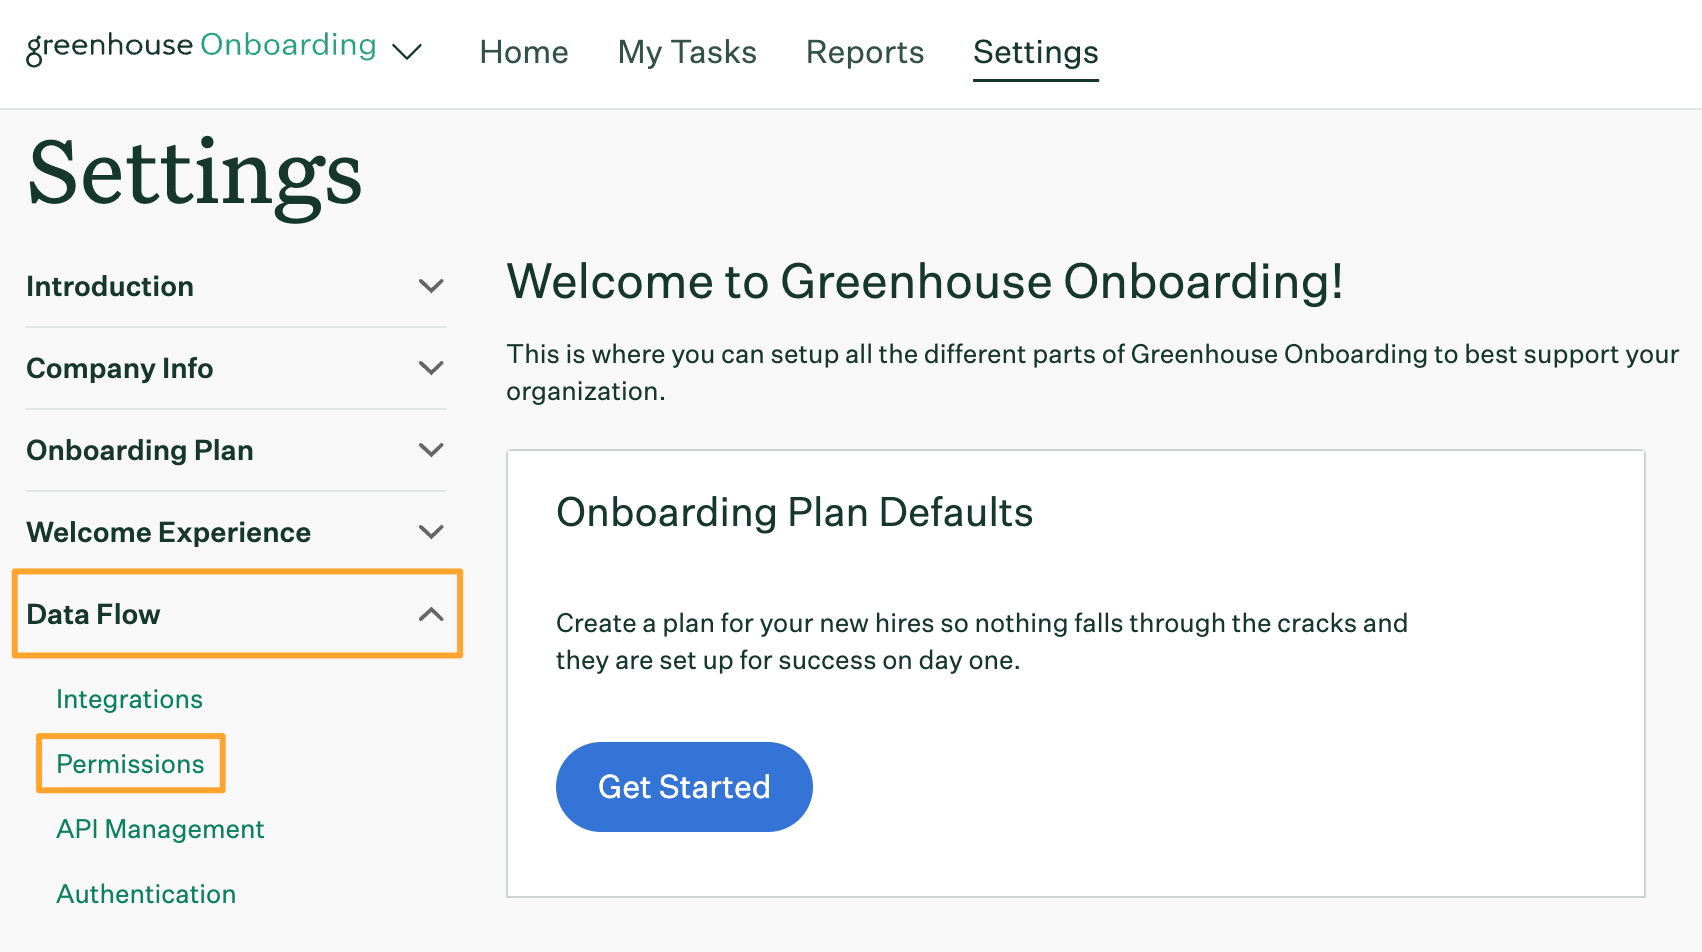 Greenhouse Onboarding Settings page with Data Flow and Permissions tabs highlighted